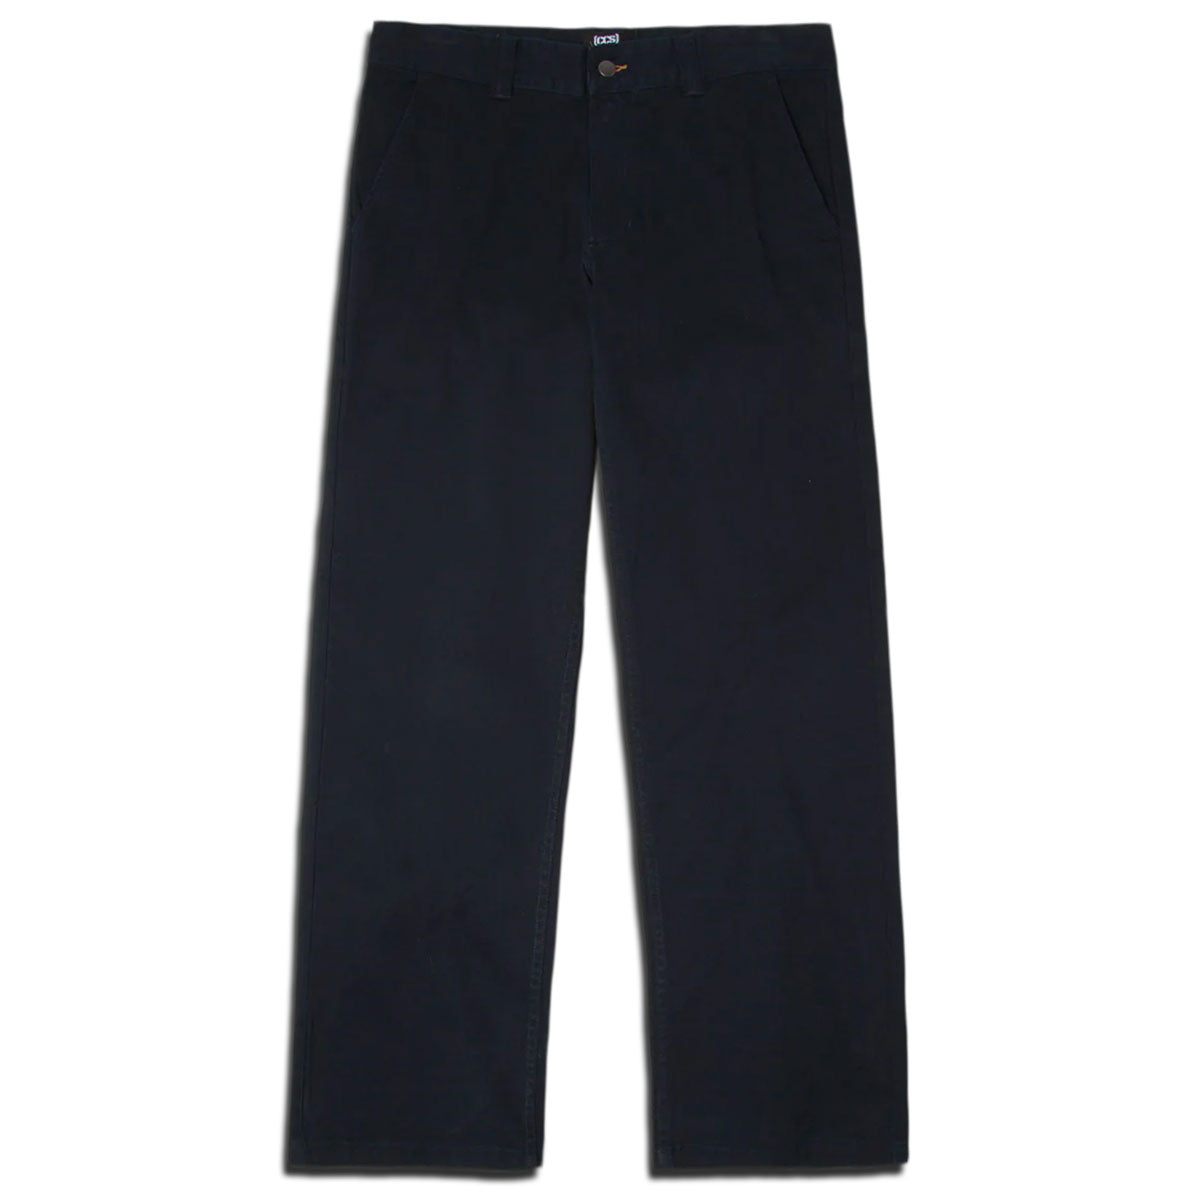 CCS Standard Plus Relaxed Chino Pants - Navy image 5